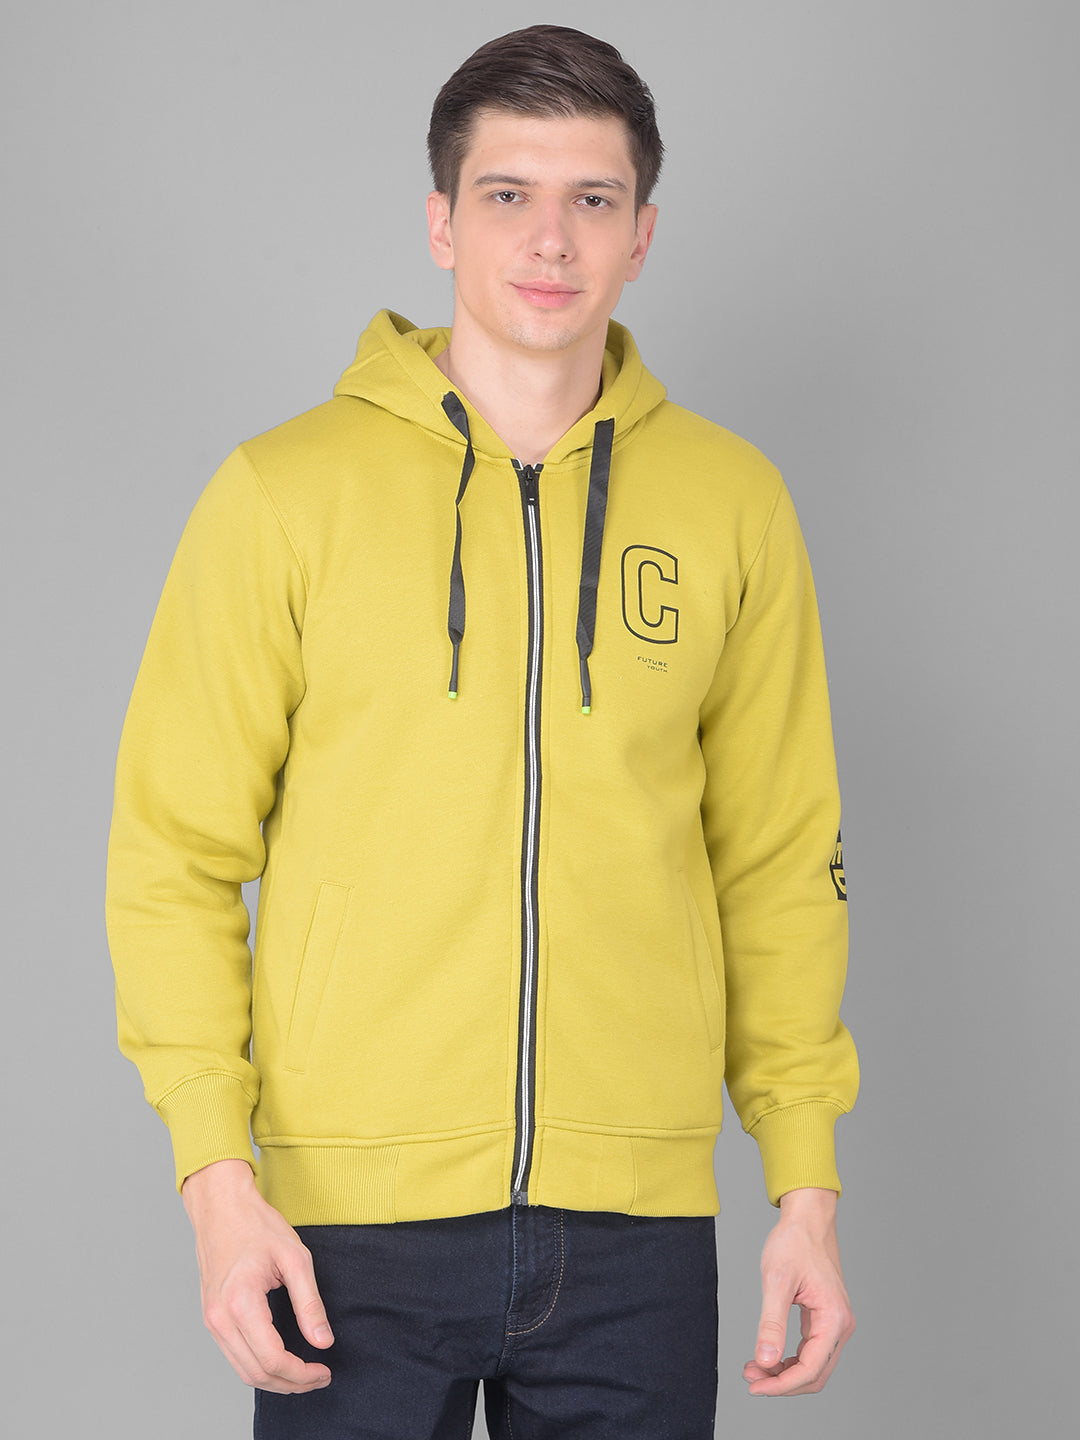 PURPLE BRAND grey zip up hoodie is a stylish and comfortable choice,  perfect for adding a pop of color to your wardrobe. It combines the